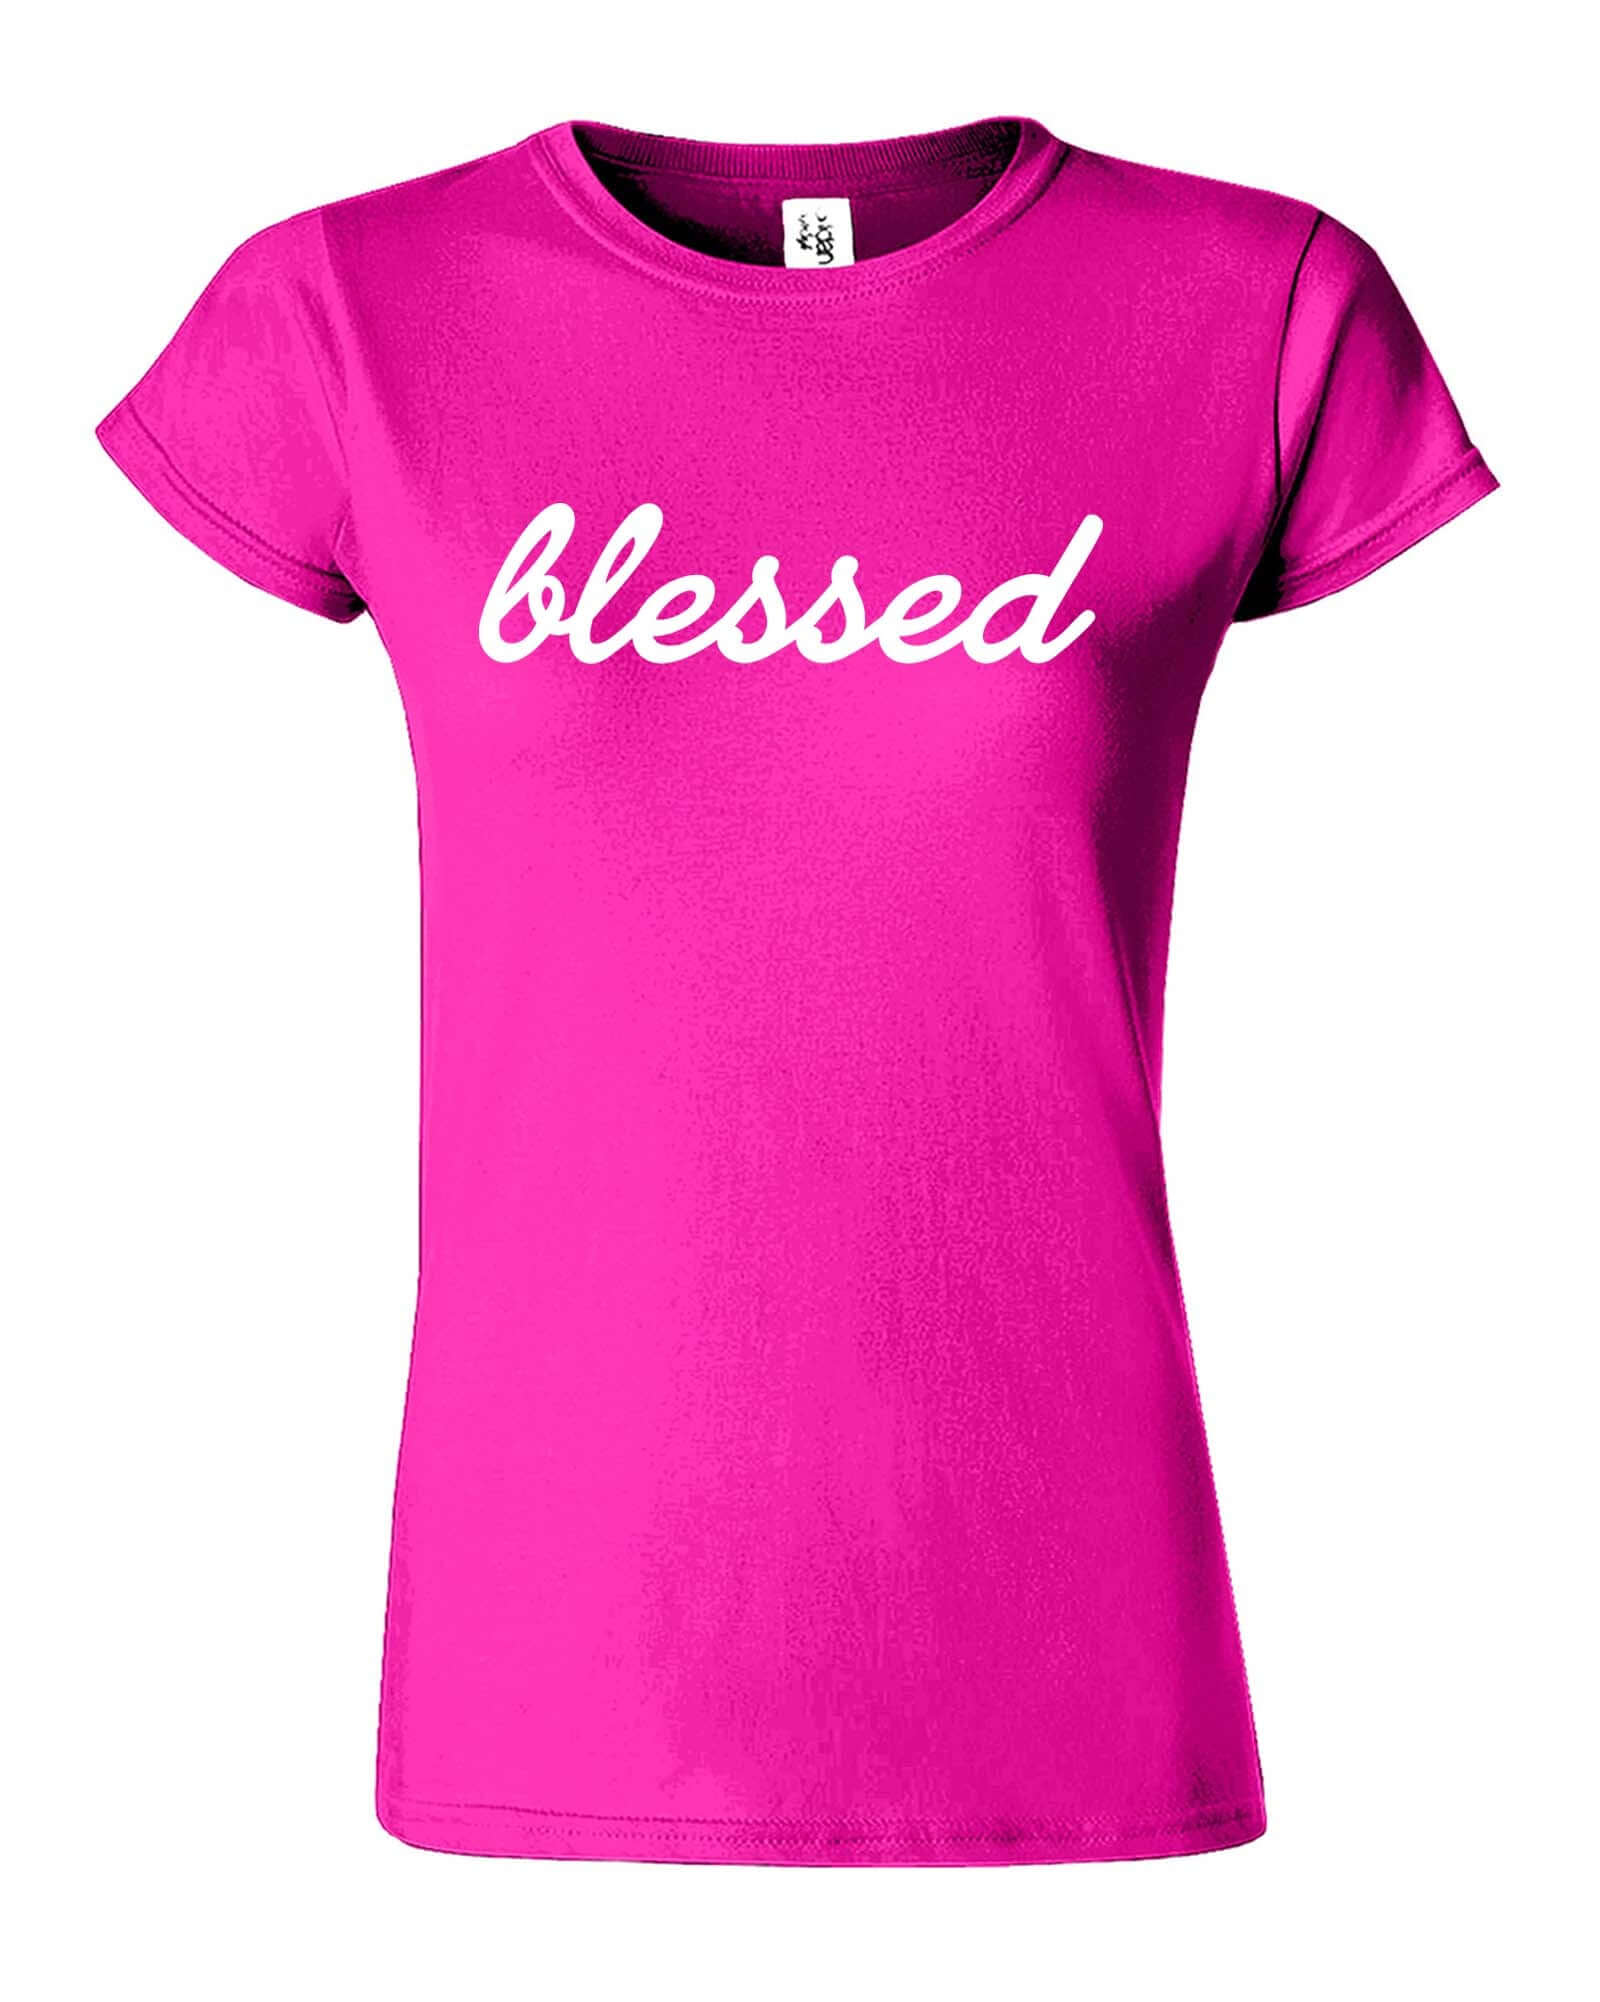 Blessed Christian God Religious Womens T-Shirt - ApparelinClick